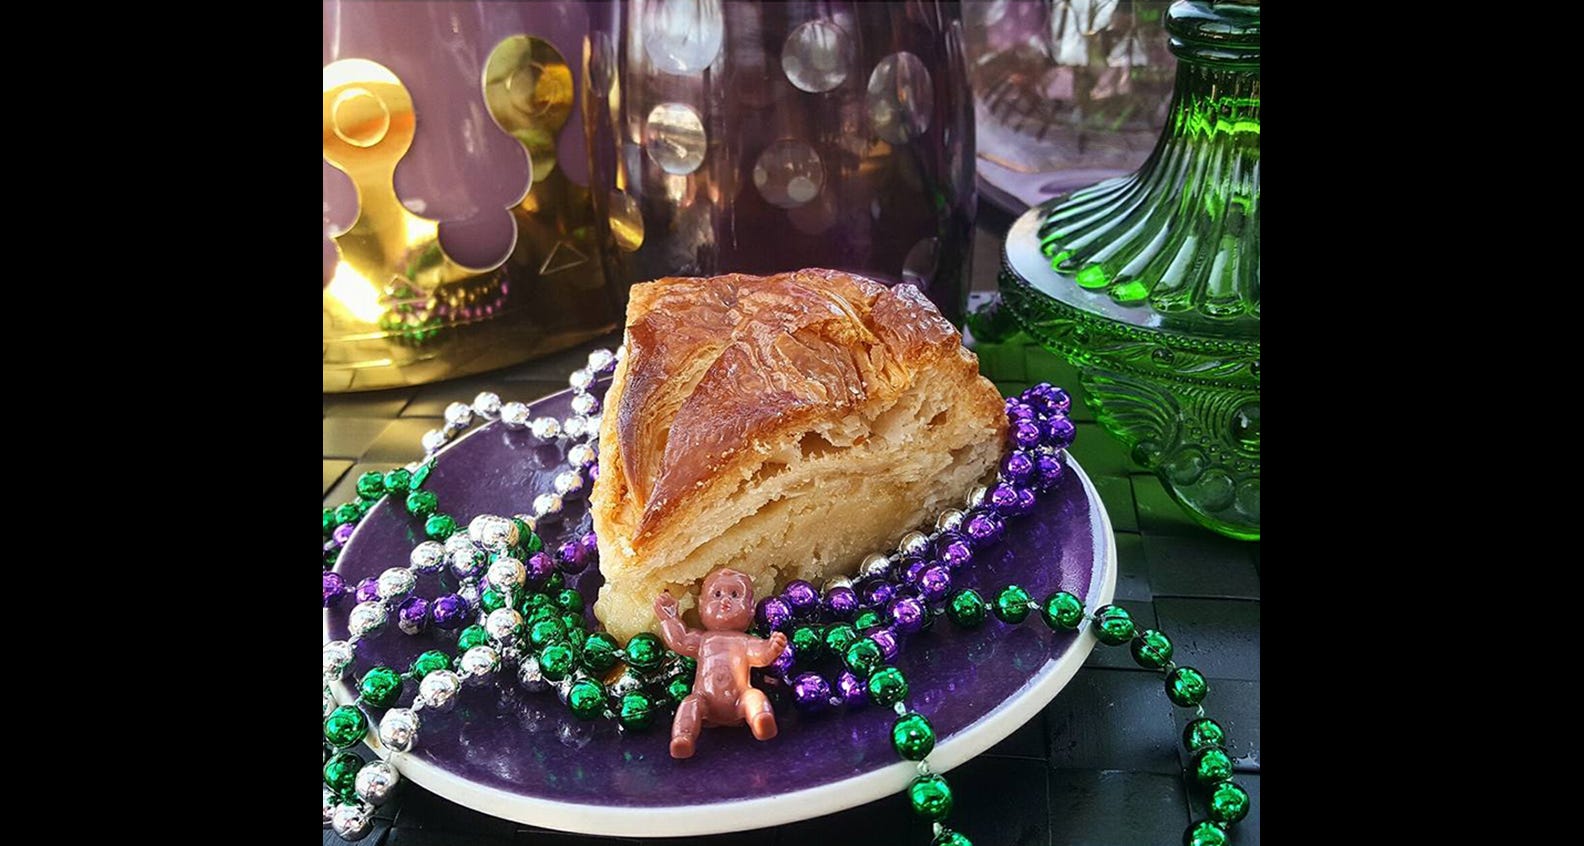 Feast your eyes on these 26 fabulous Mardi Gras king cakes from across the South